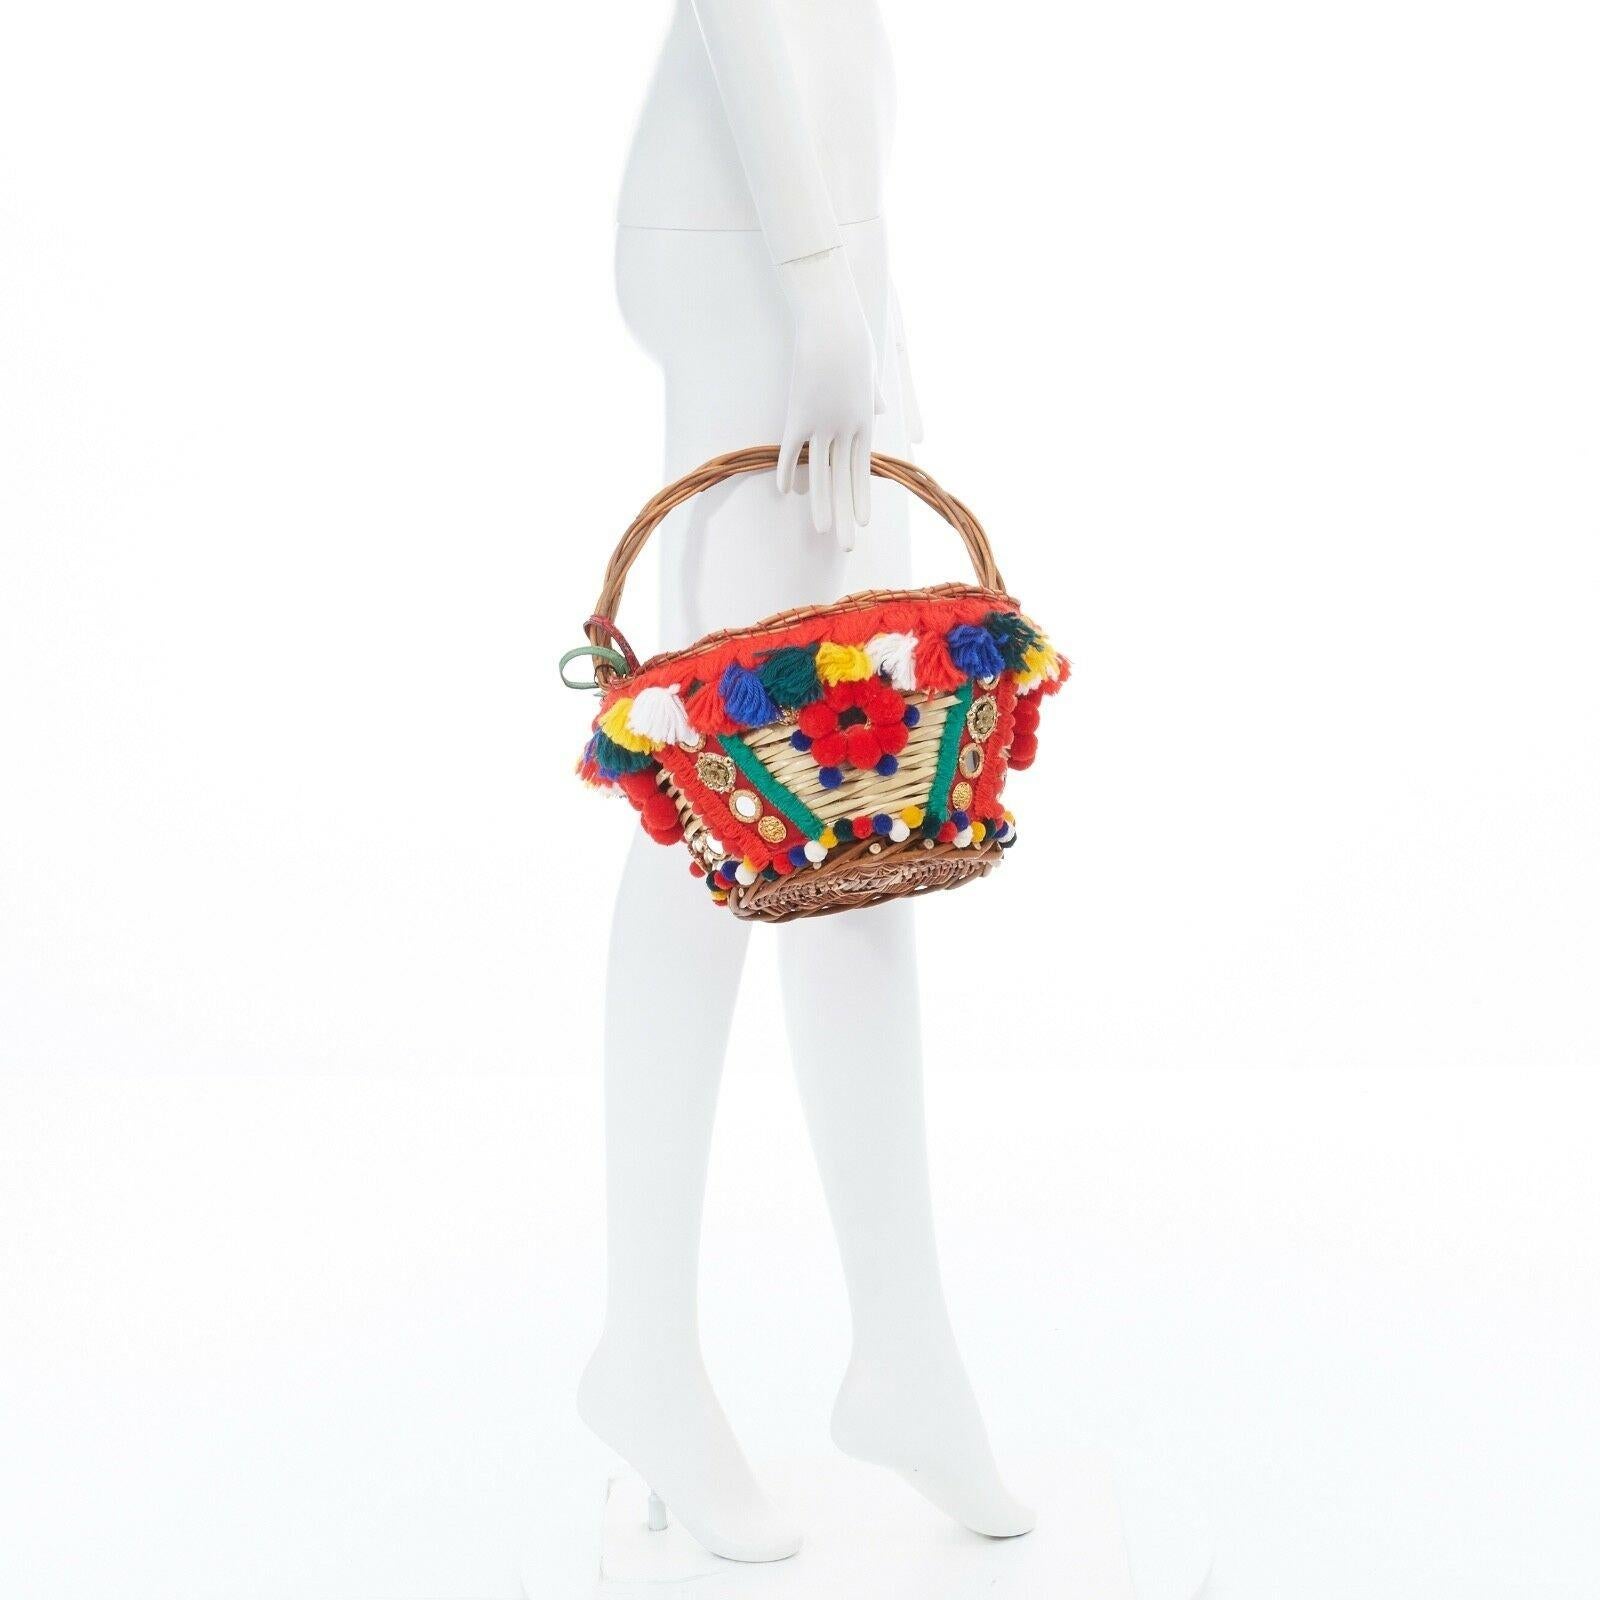 DOLCE GABBANA 2016 red pom pom embellished wicker basket pouch bag
Reference: LNKO/A00793 
Brand: Dolce Gabbana 
Designer: Domenico Dolce and Stefano Gabbana 
Collection: Spring Summer 2016 Runway 
Material: Wicker 
Color: Multicolour 
Pattern: